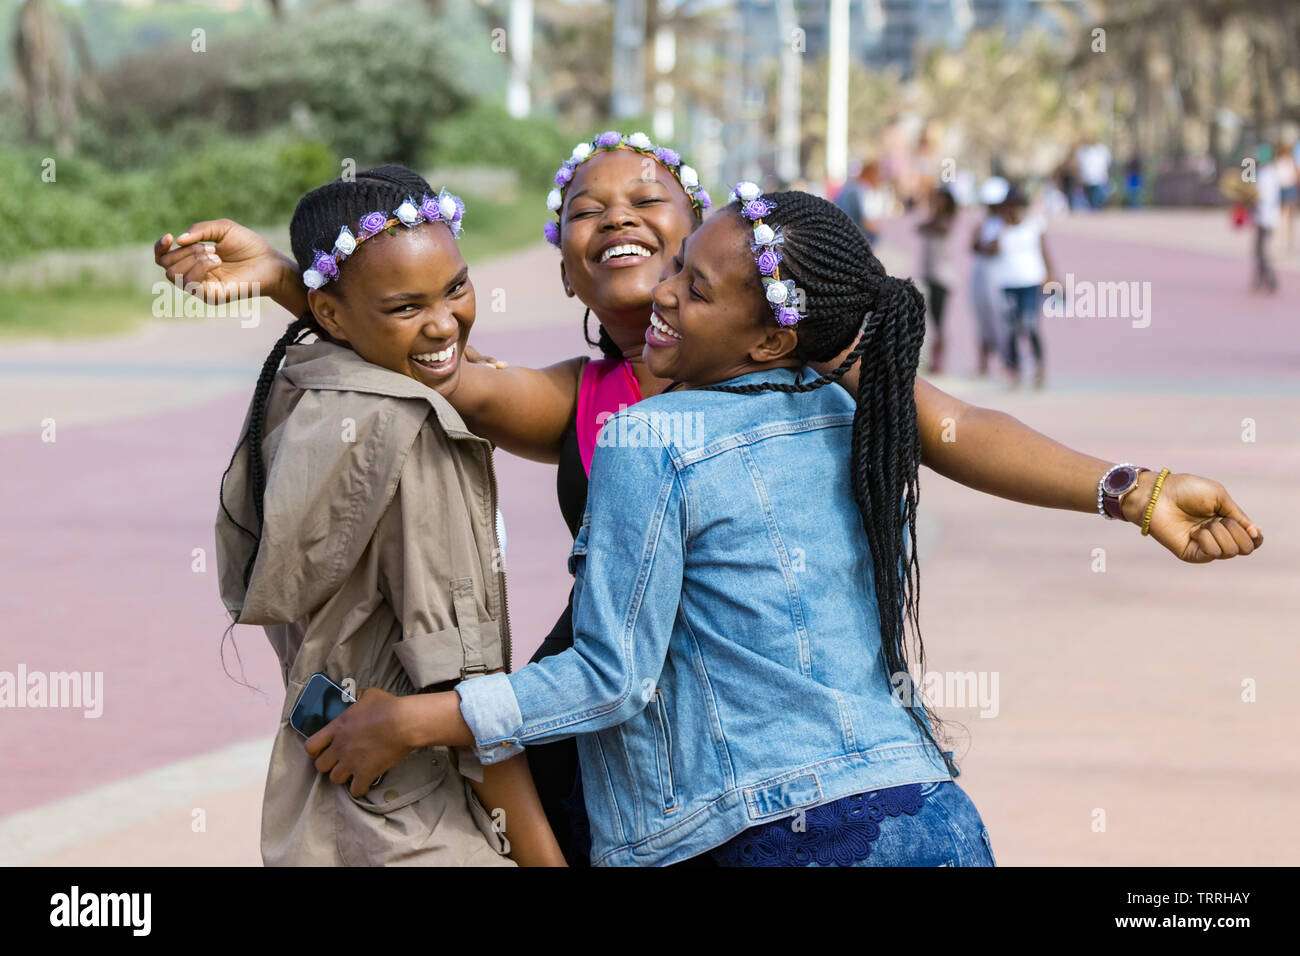 Three beautiful black young women laughing and celebrating friendship outdoors in South Africa. Stock Photo